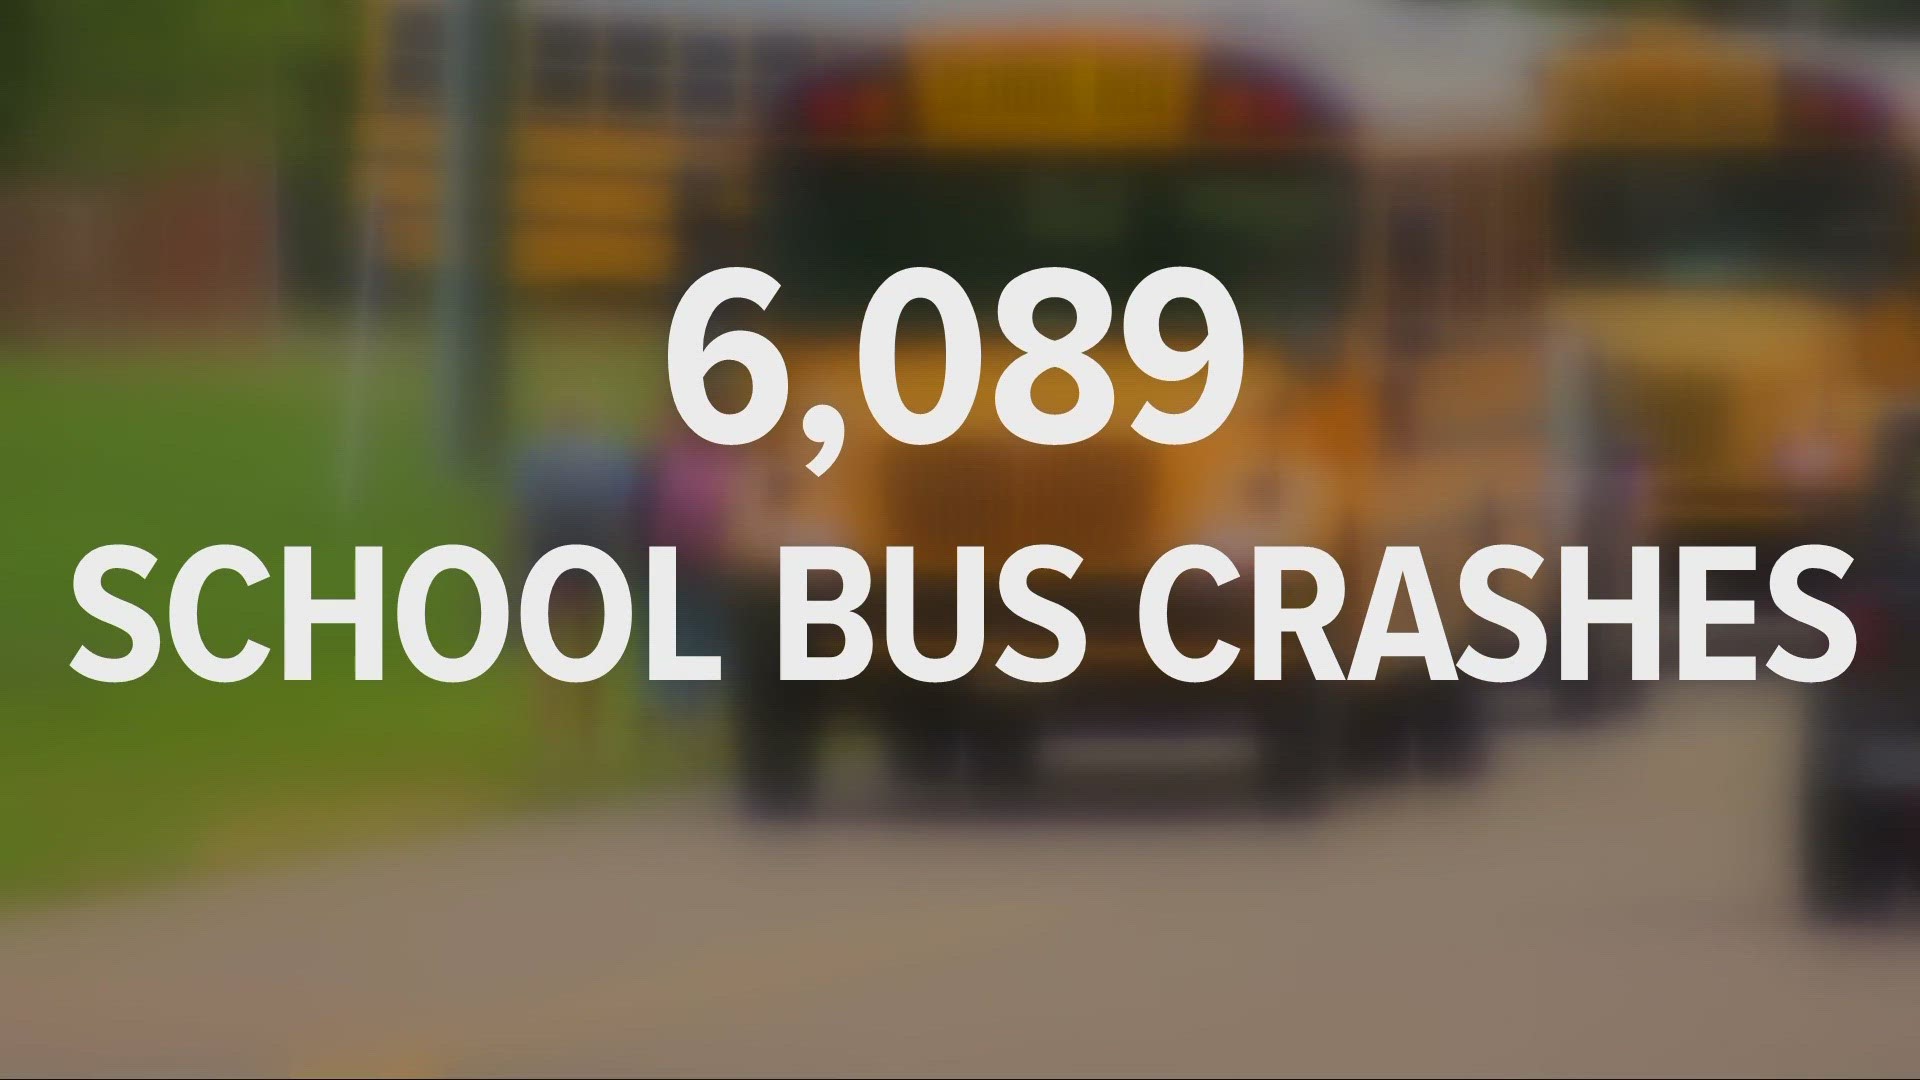 A school bus crash in Clark County left one student dead and more than 20 others injured.